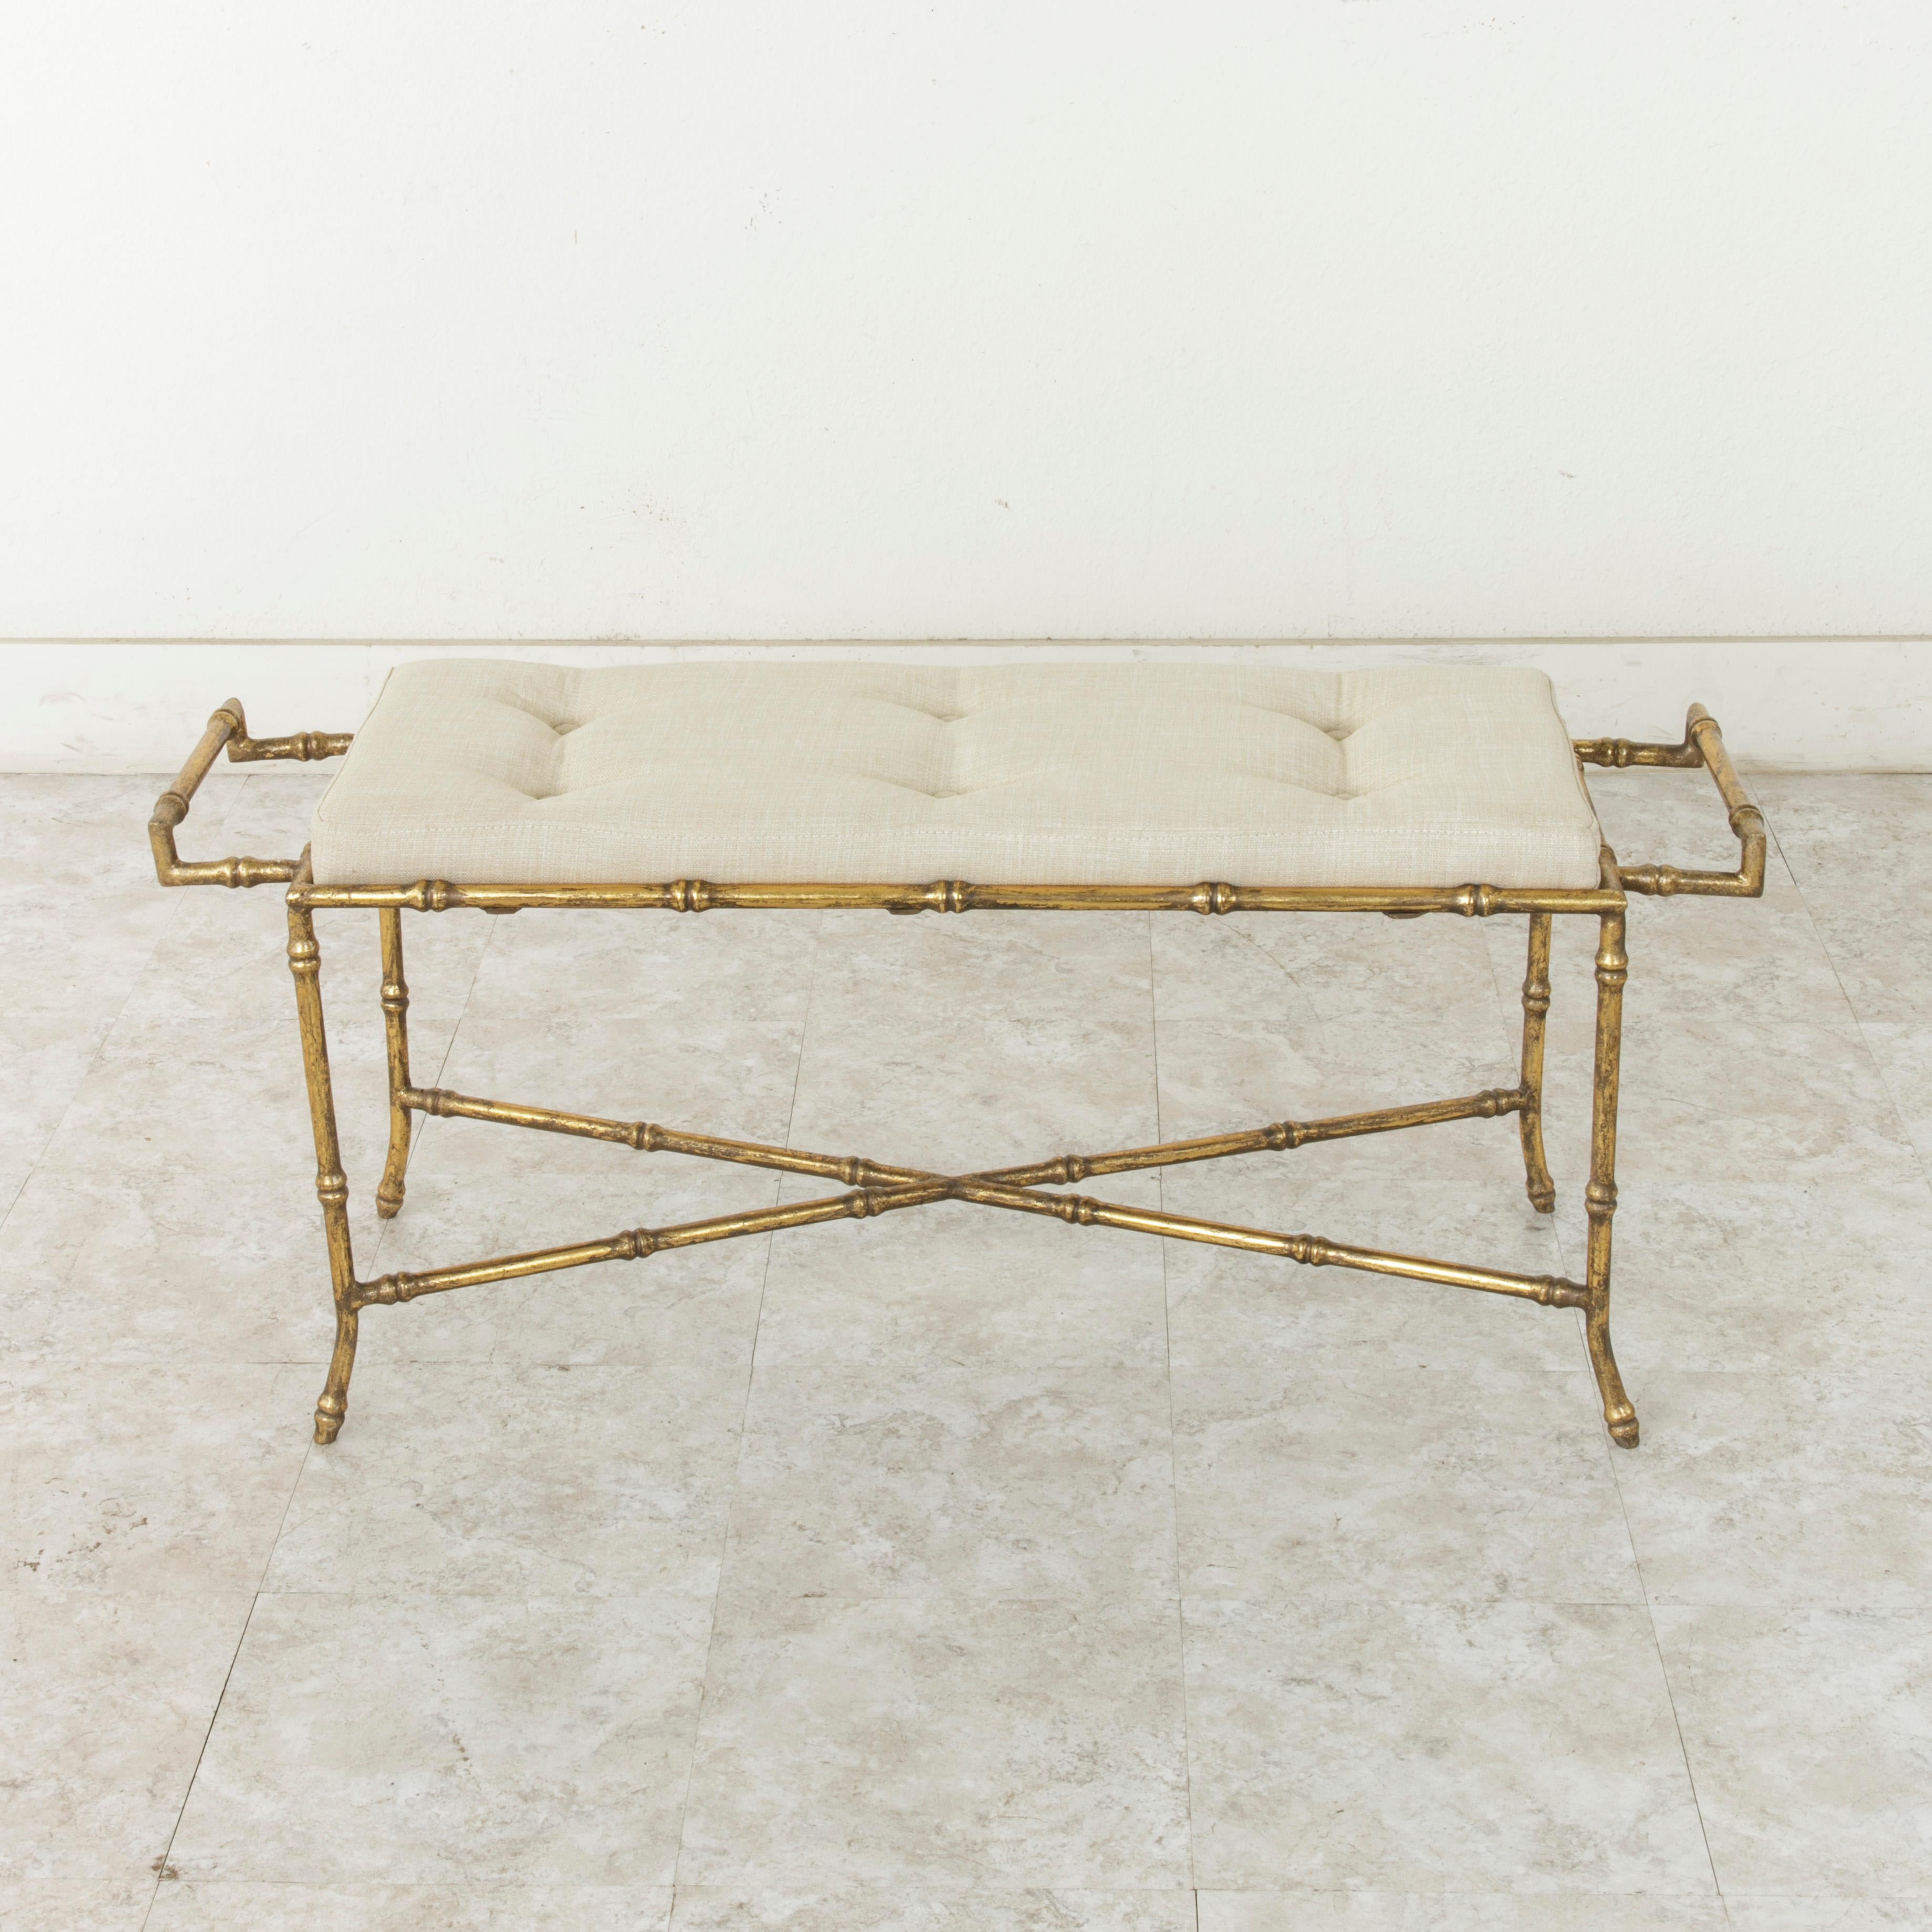 An original creation by a contemporary French designer, this gilded iron banquette or bench features a faux bamboo aesthetic with an X stretcher at the base and a handle at each end. Newly upholstered in France in linen with button detailing.
   